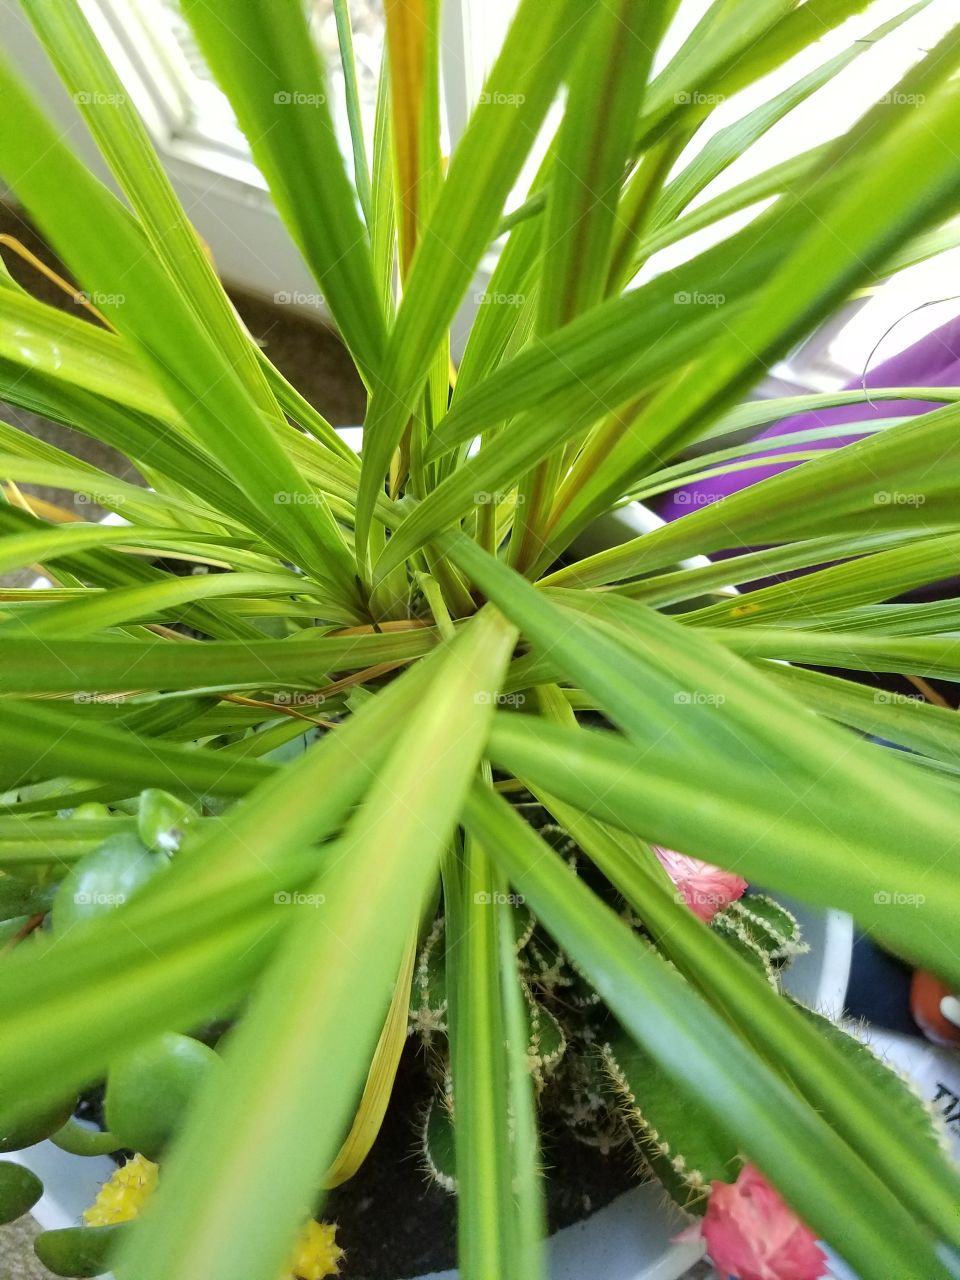 Dracaena Long Indoor Spike Grass Aerial View Close up